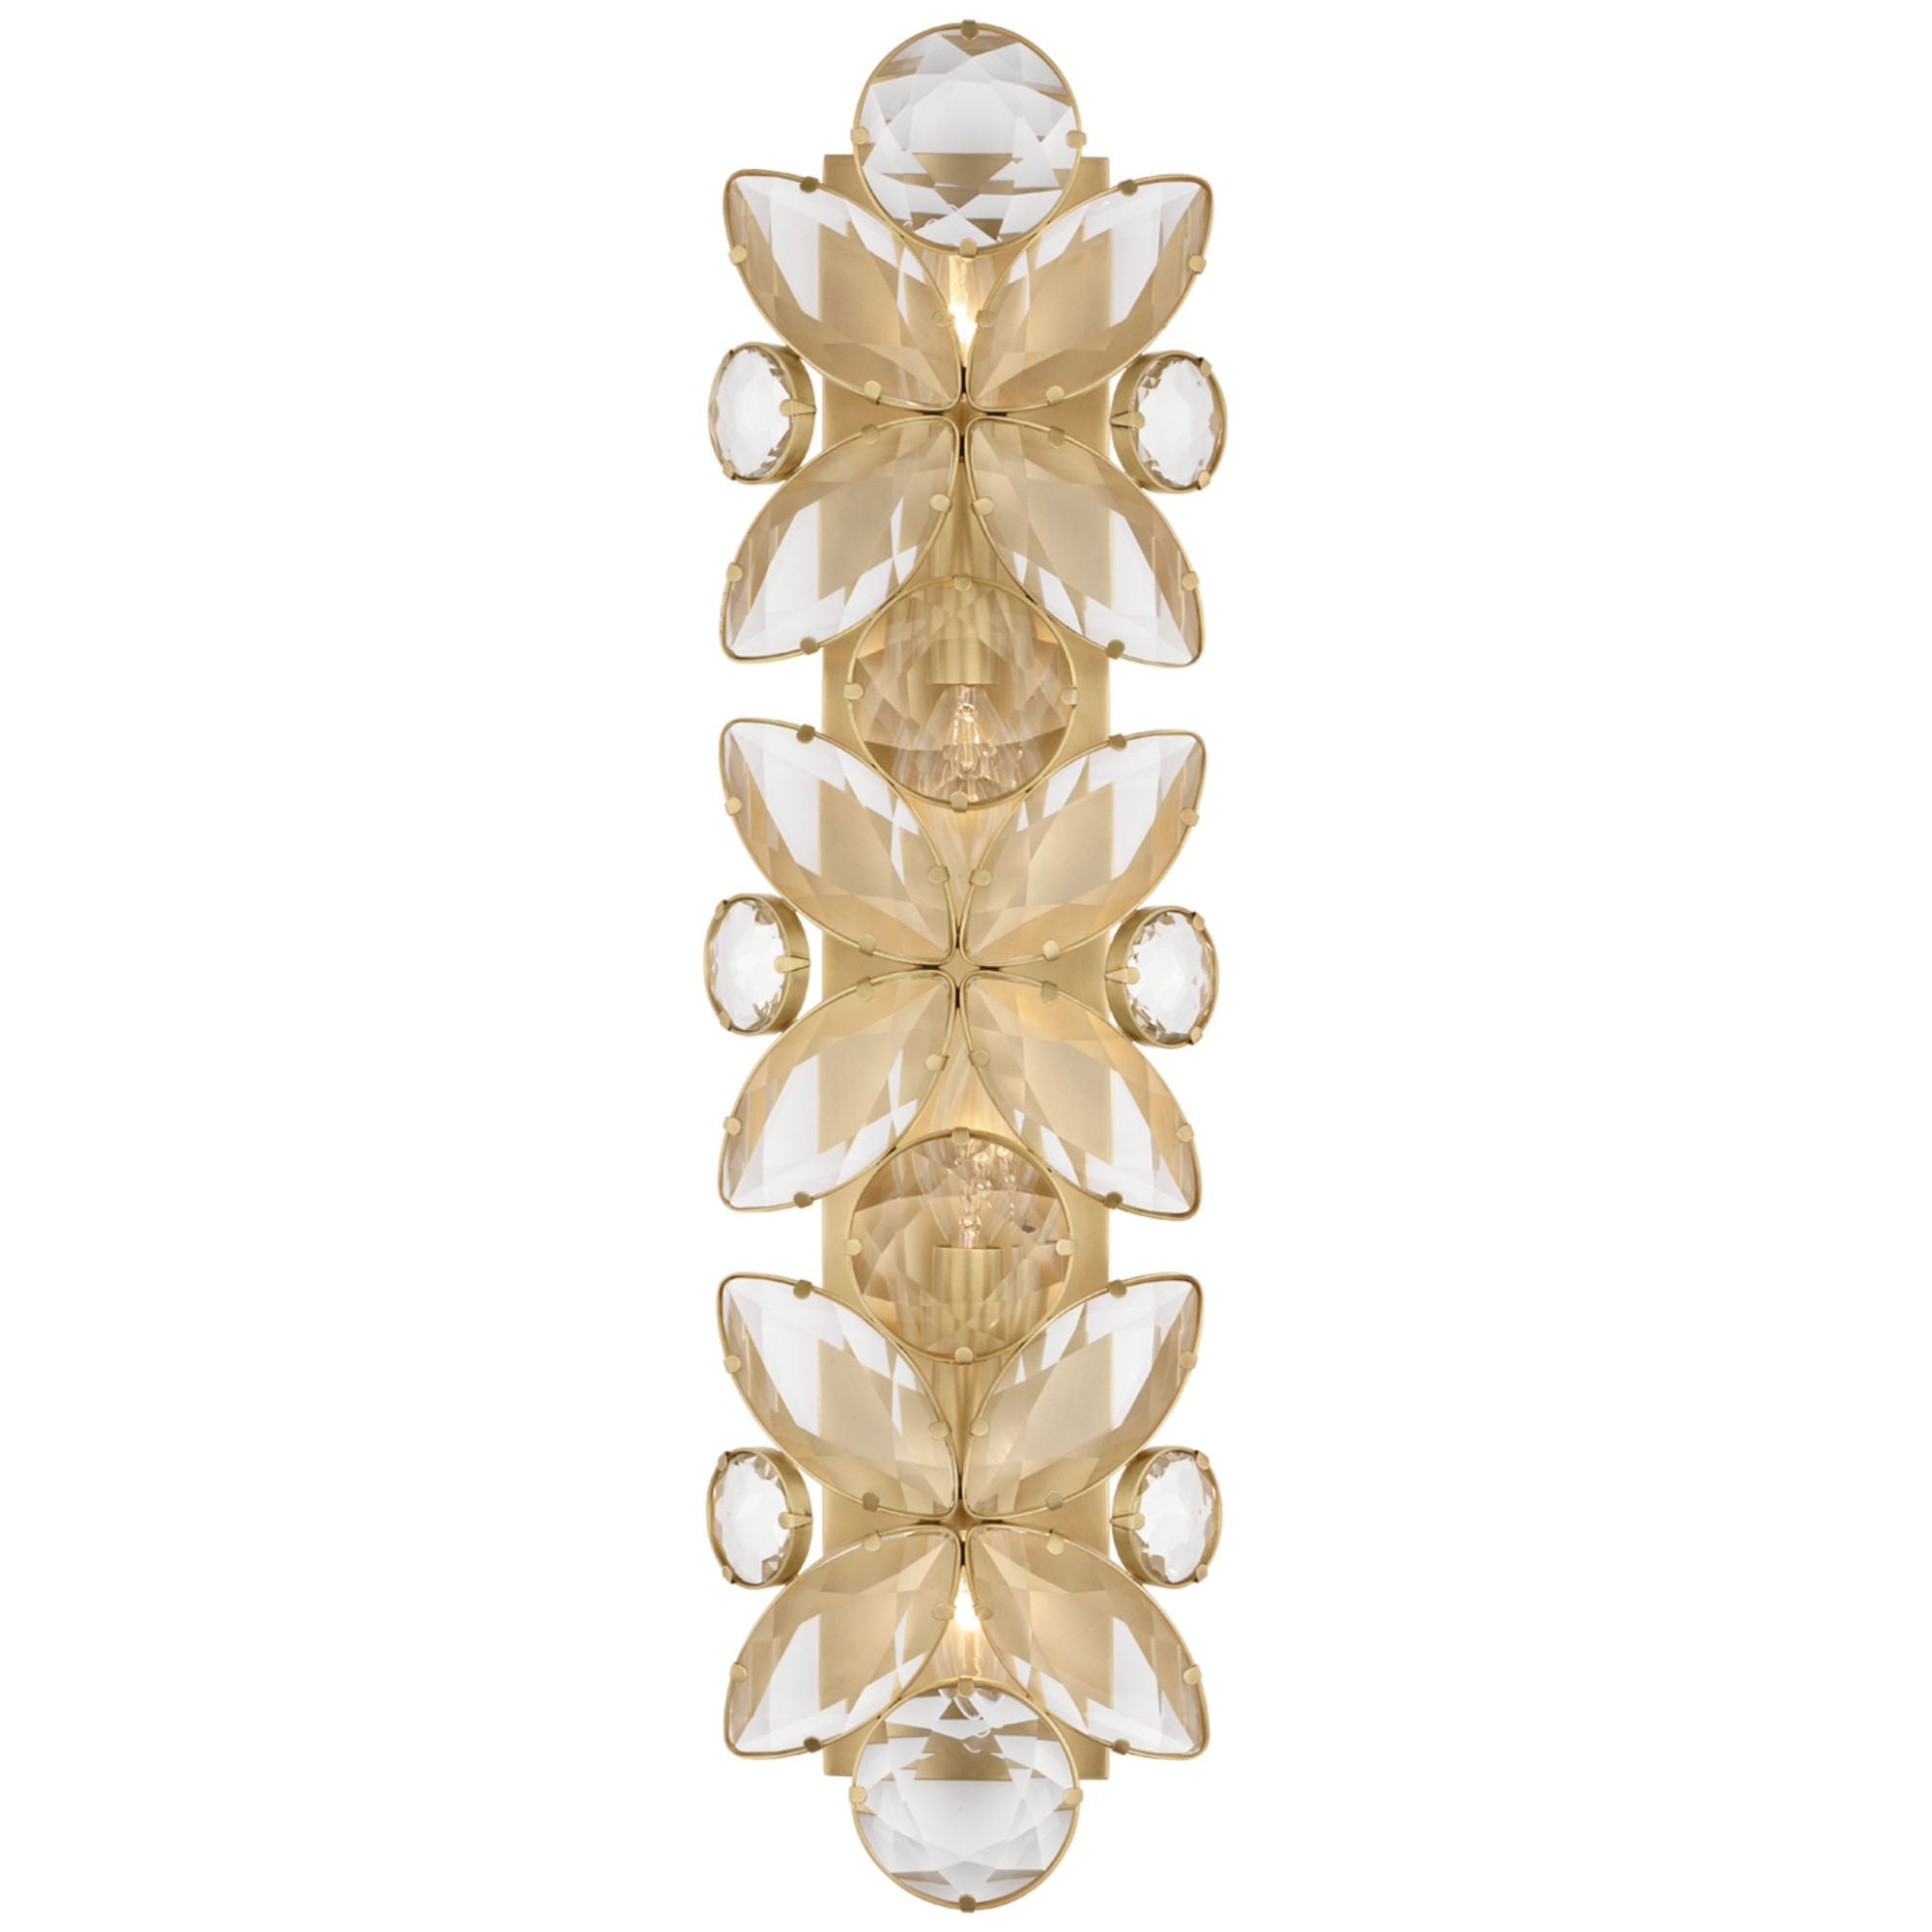 kate spade new york Lloyd 26" Sconce in Soft Brass with Crystal